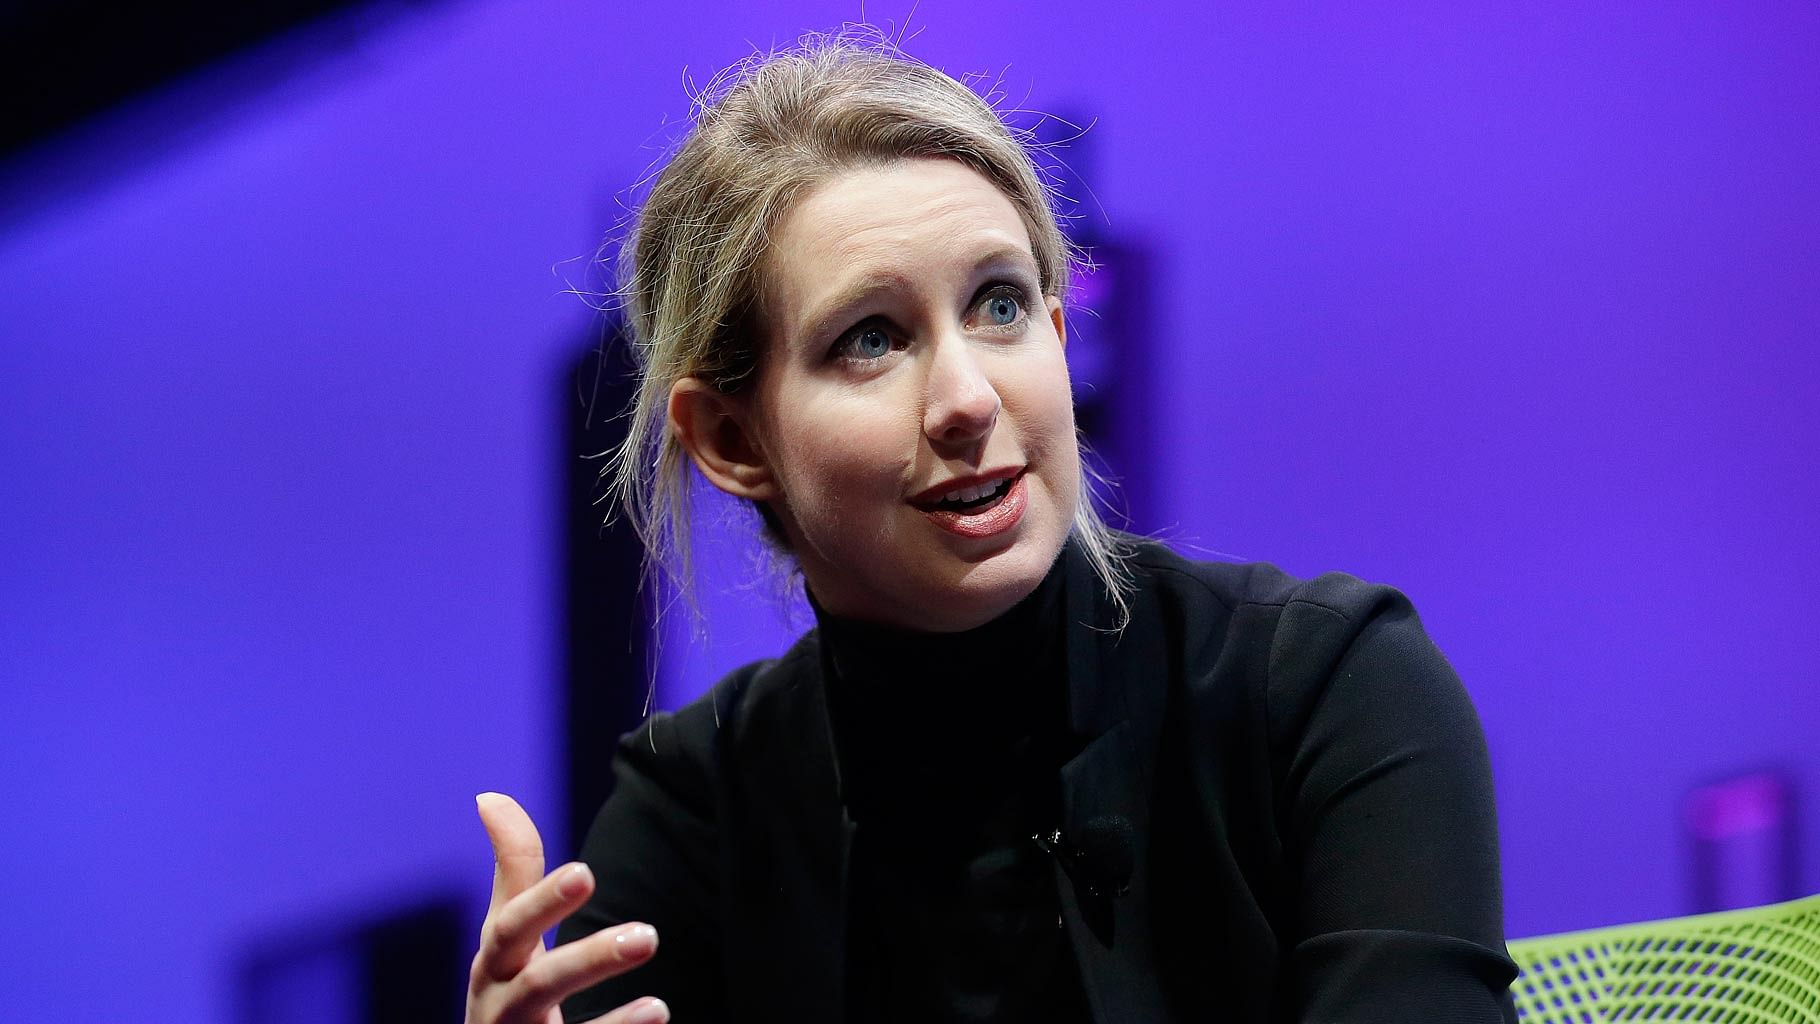 Elizabeth Holmes established Theranos, a blood testing company in 2003 with the intention of reinventing diagnostic tests, focusing on greater access to healthcare for all. (Photo: AP/ Jeff Chiu)